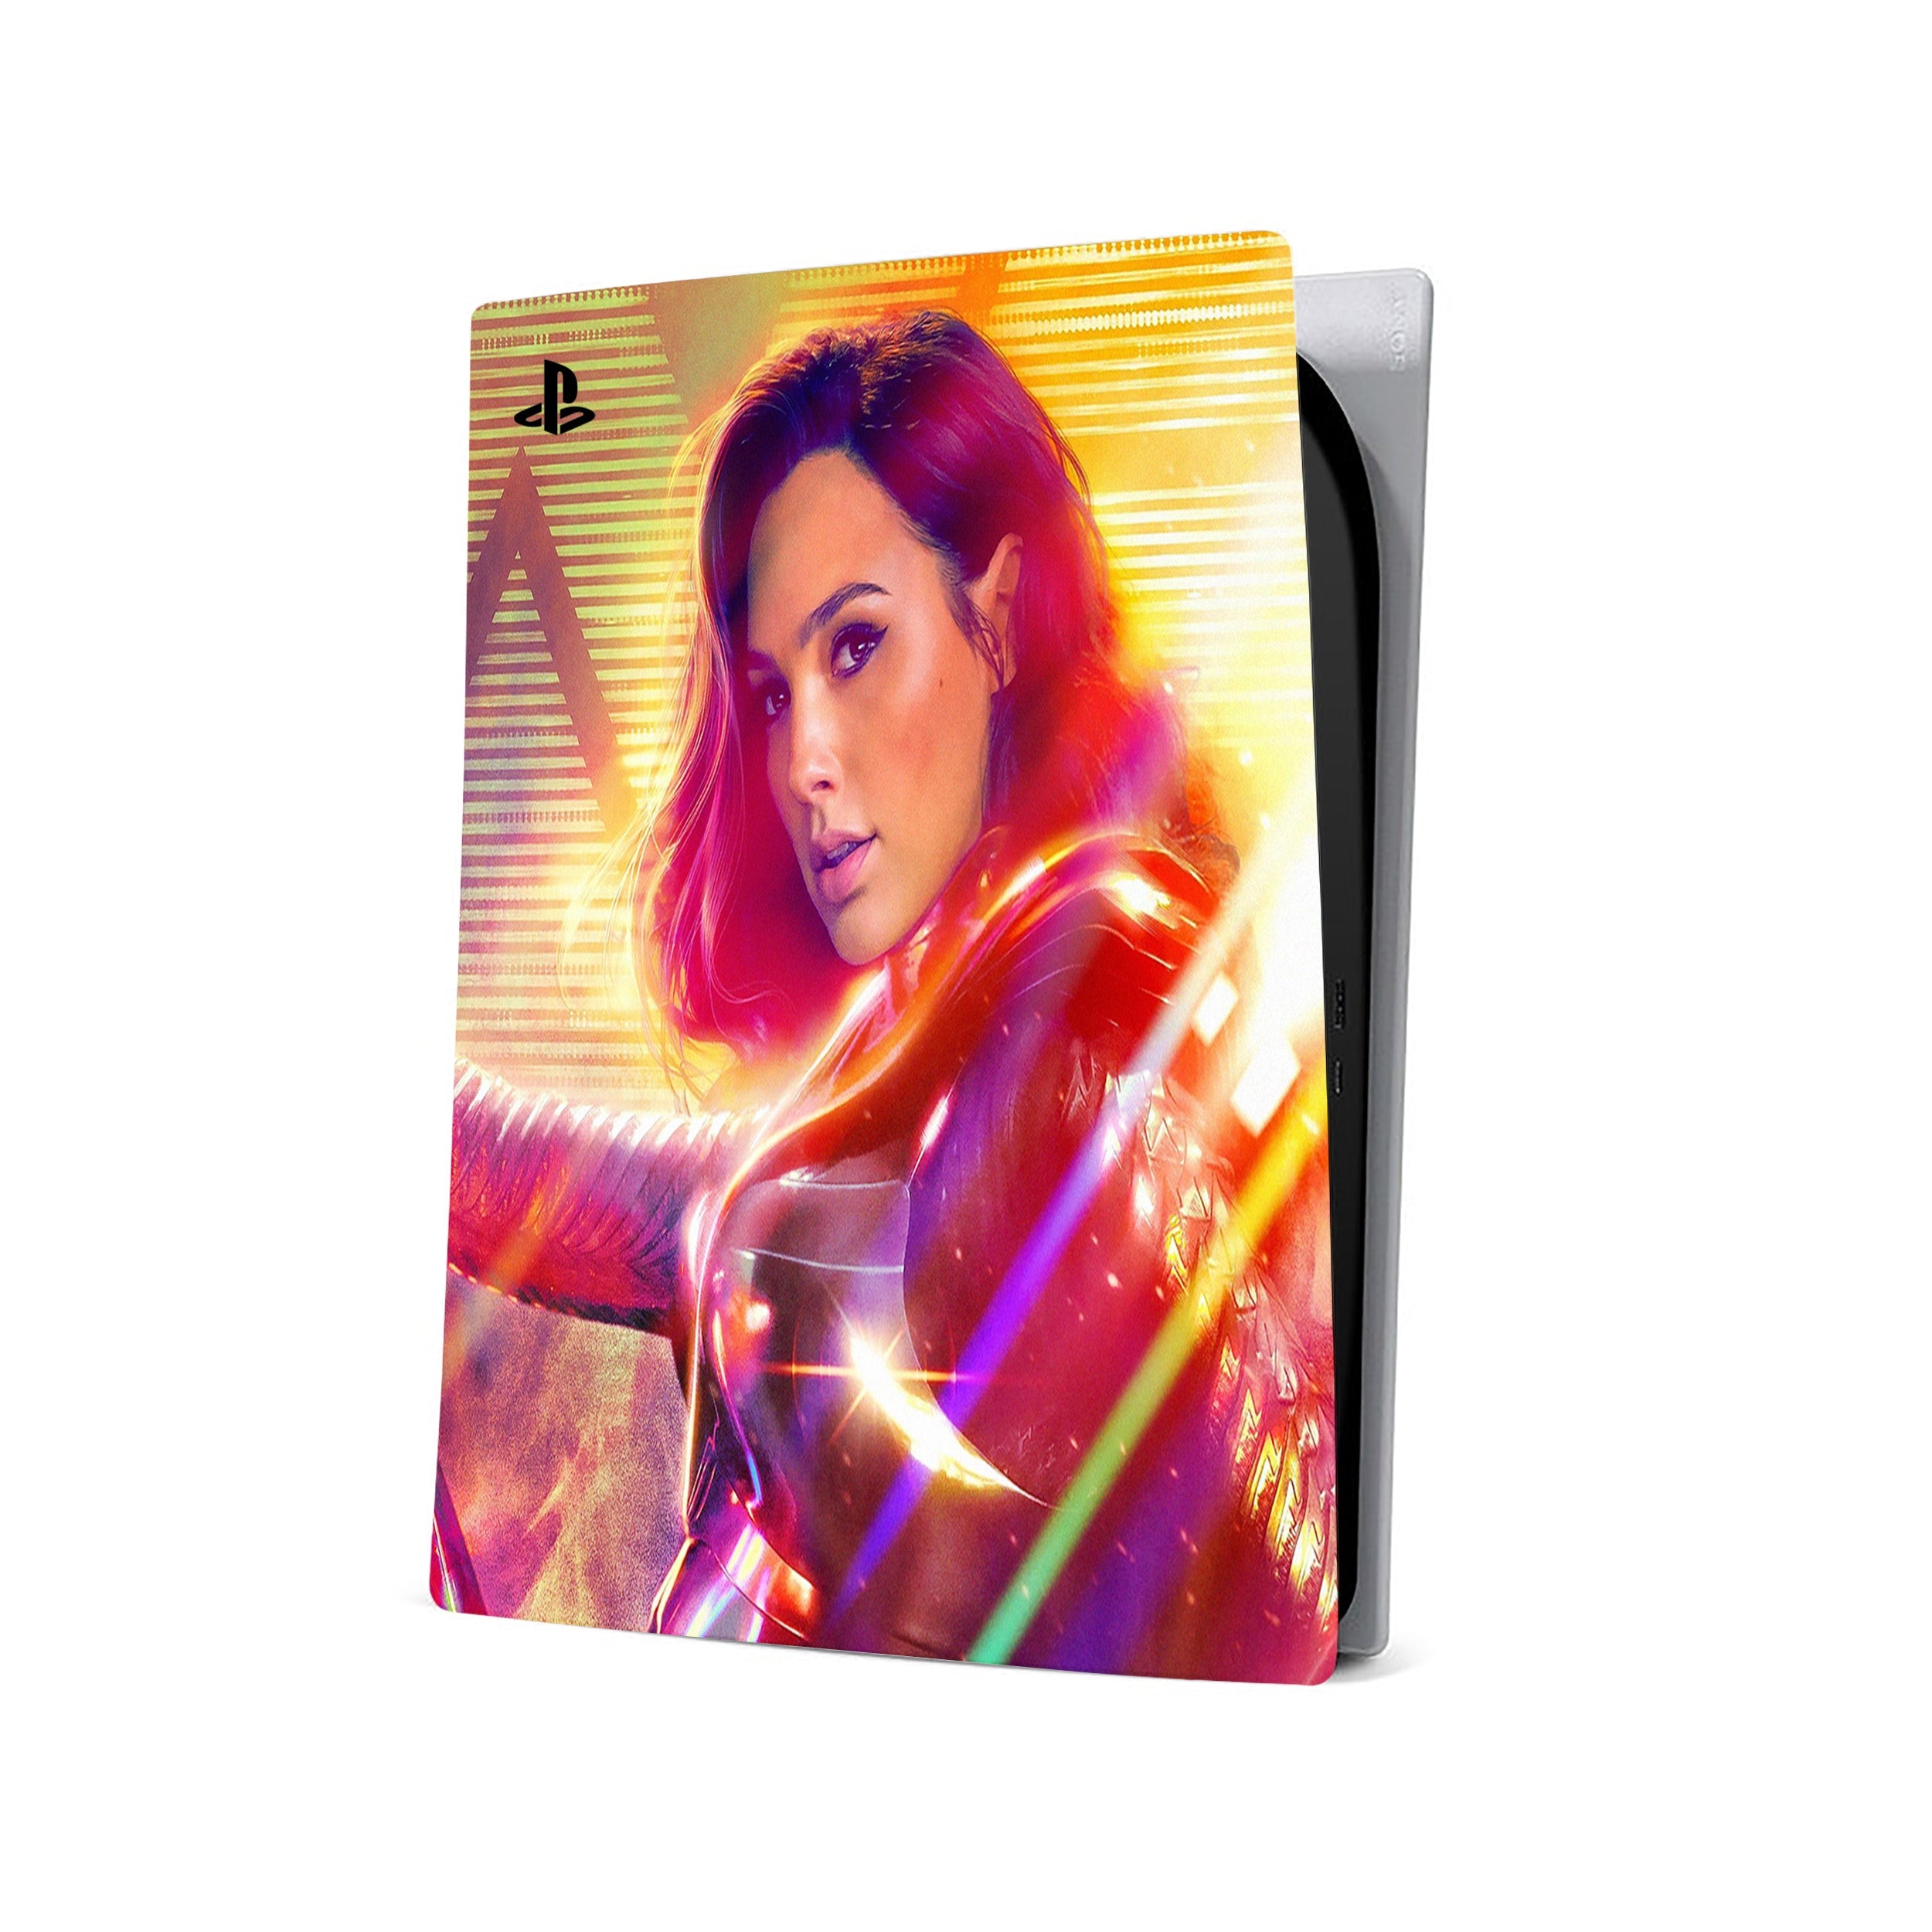 A video game skin featuring a DC Comics Wonder Woman design for the PS5.